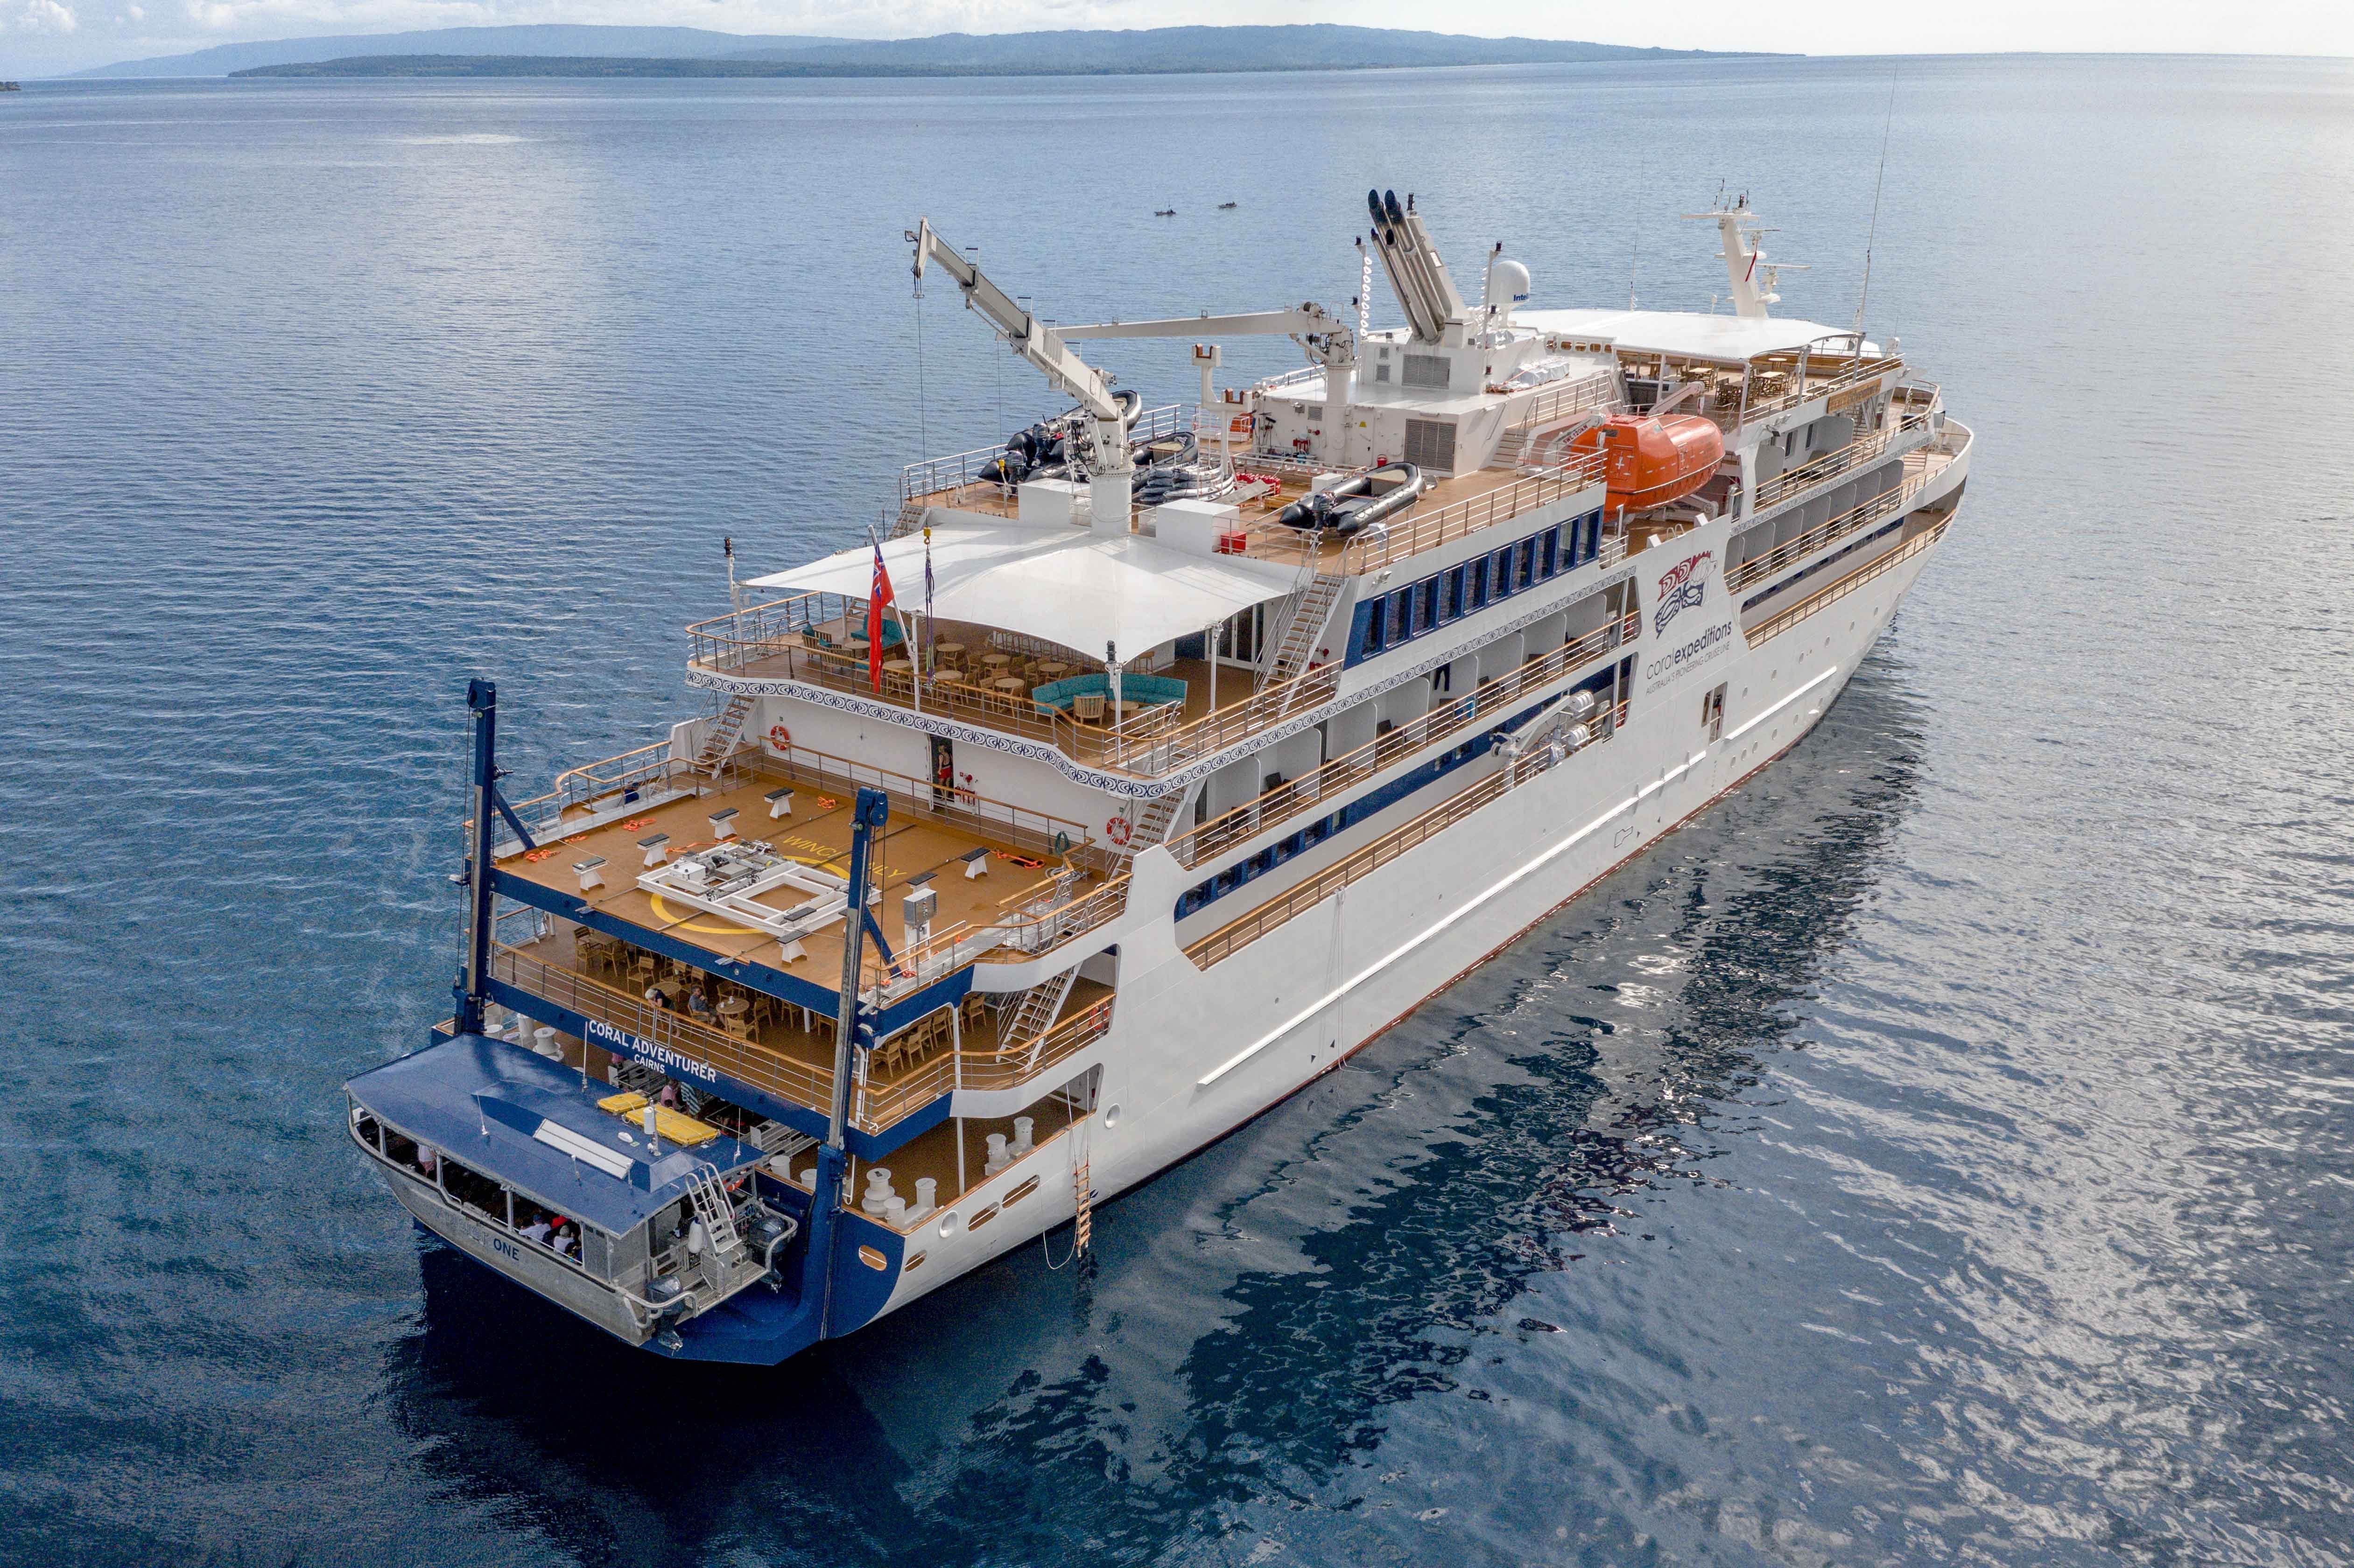 The new 120-passenger Coral Adventurer will sail from Darwin, Australia, and circumnavigate the island of New Guinea, on a unique cruise departing in October next year.